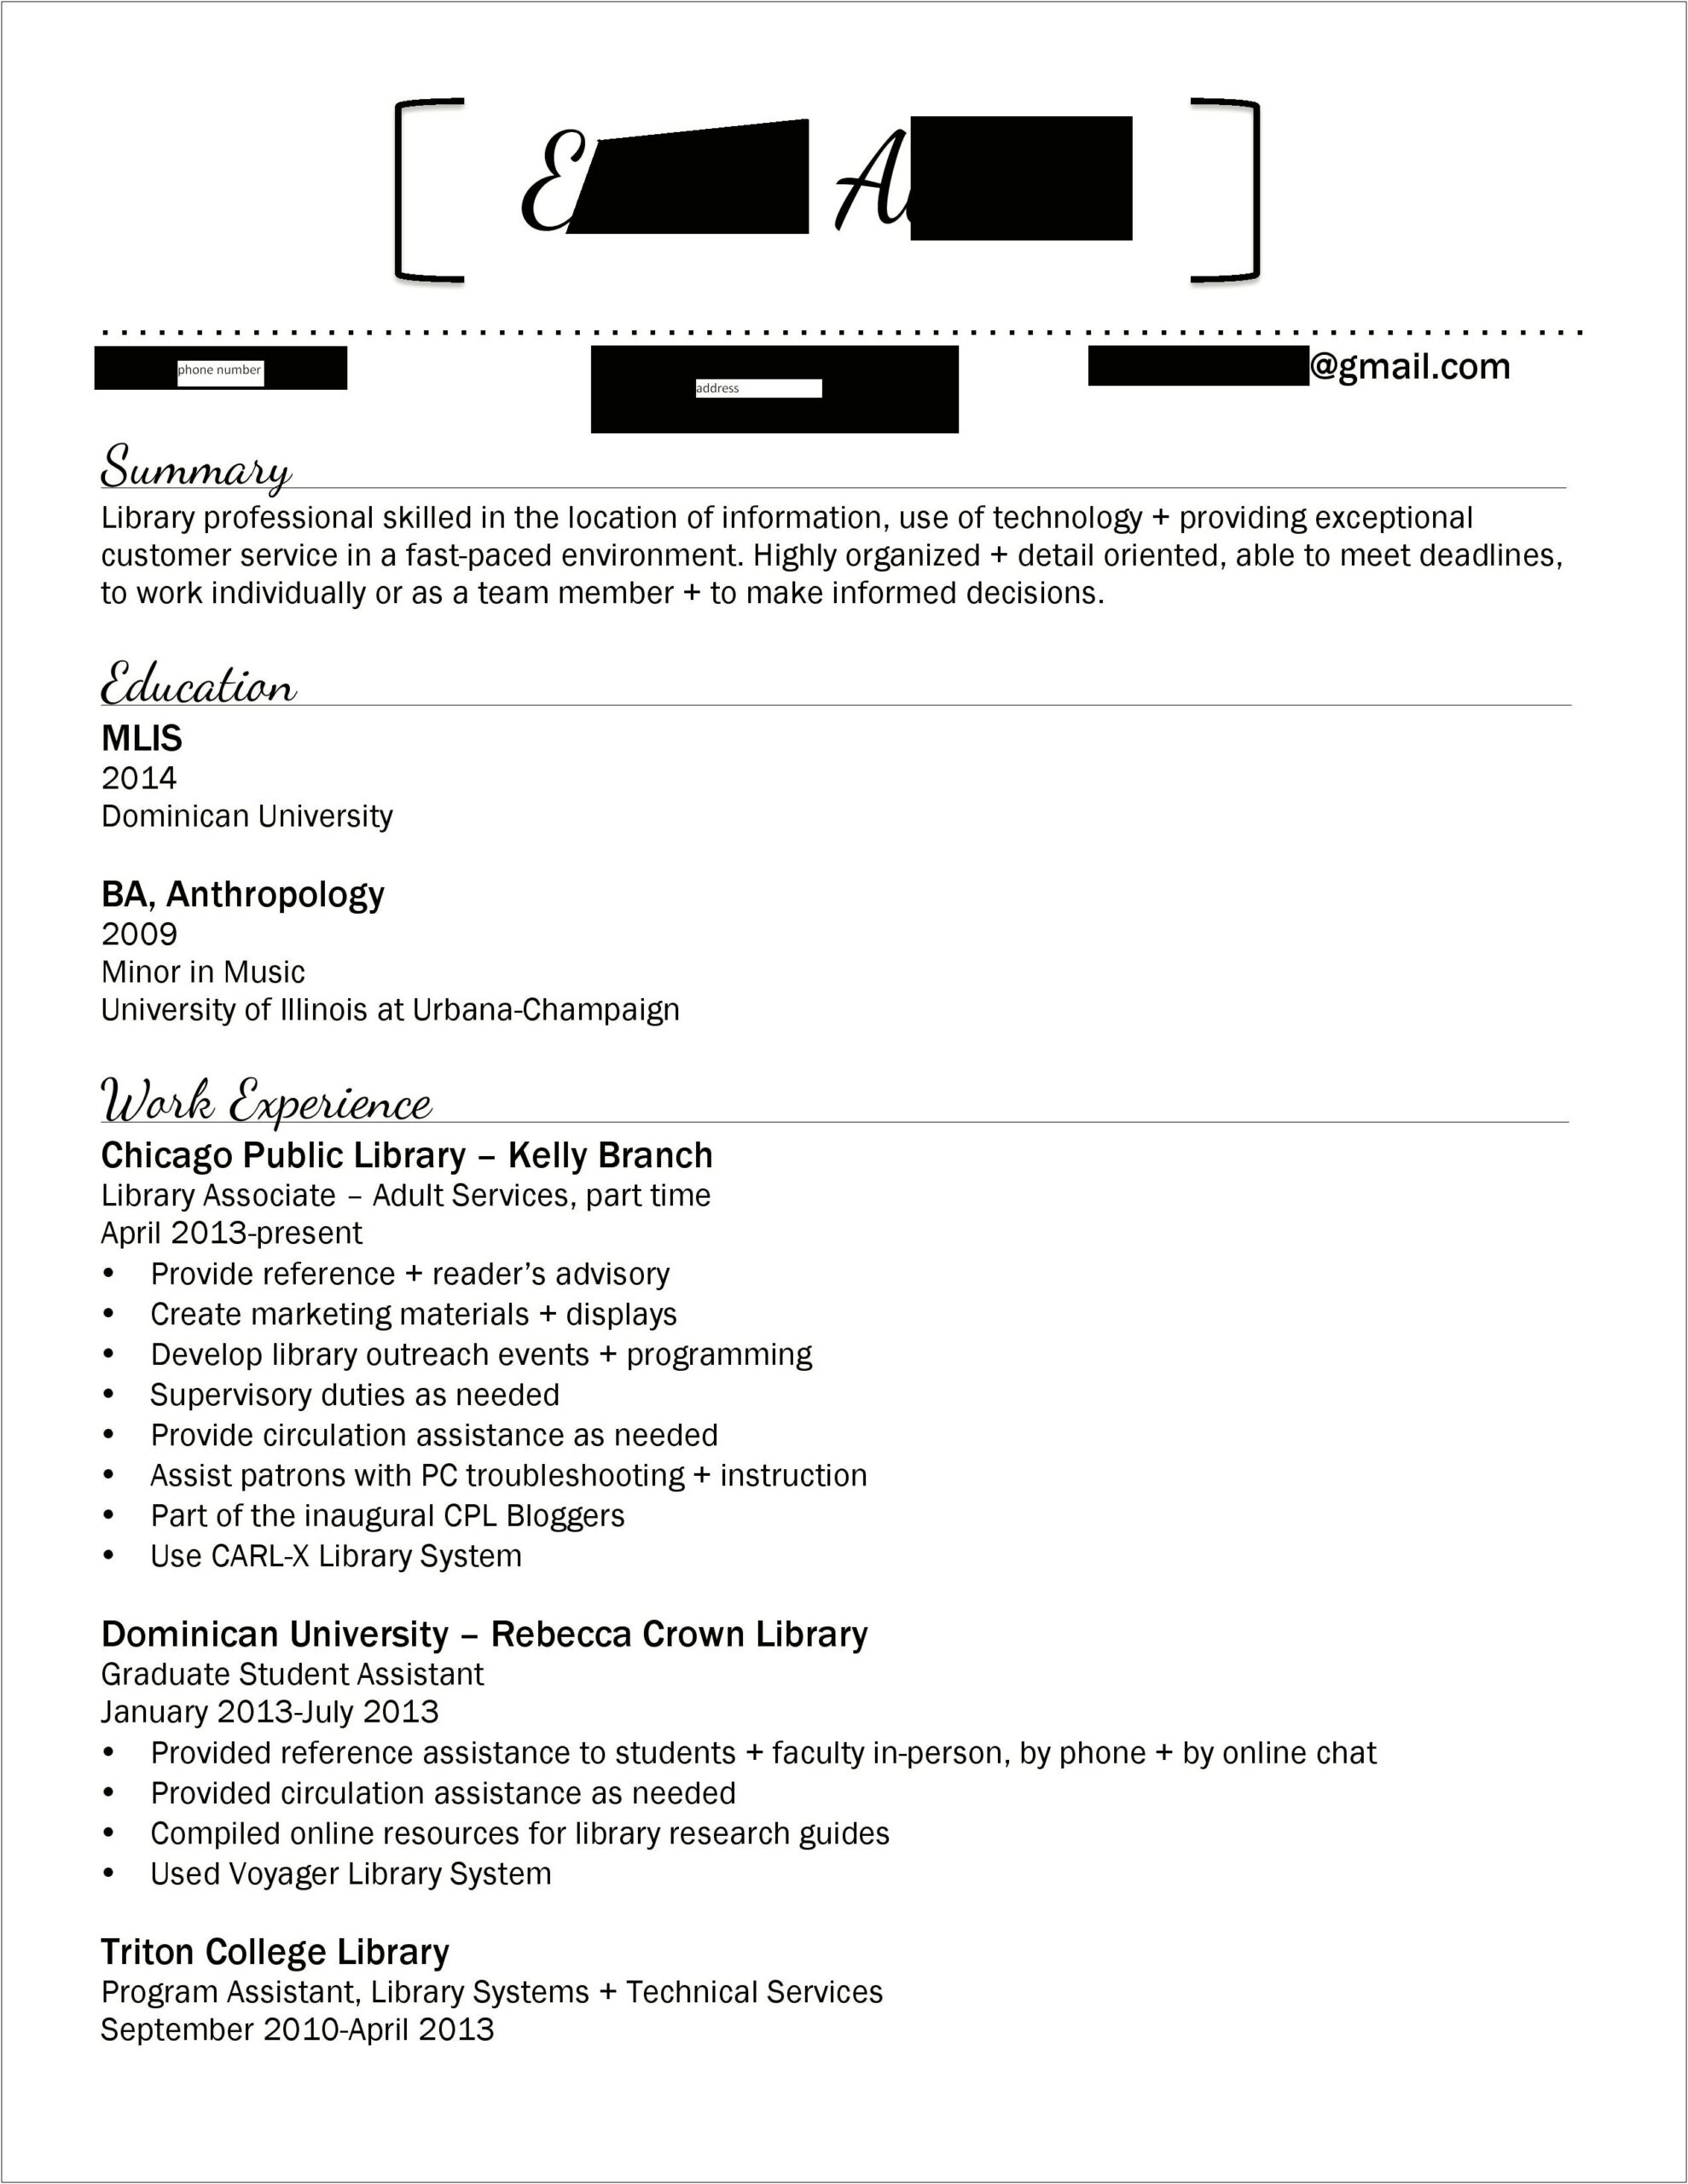 Sample Resume Cover Letter With Salary Requirement